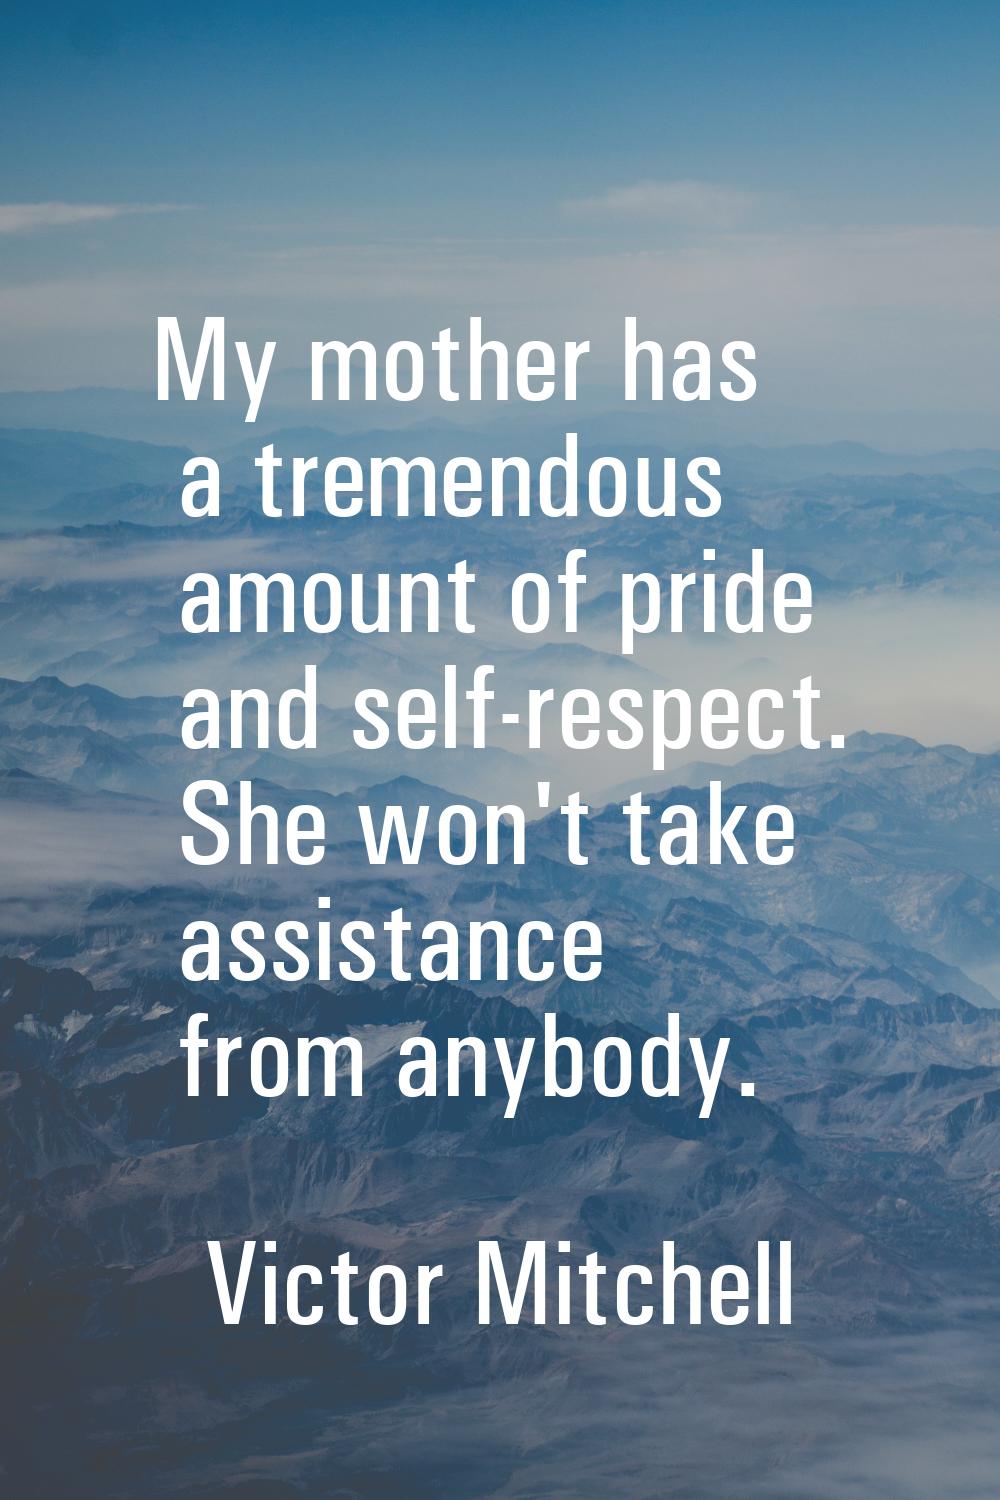 My mother has a tremendous amount of pride and self-respect. She won't take assistance from anybody